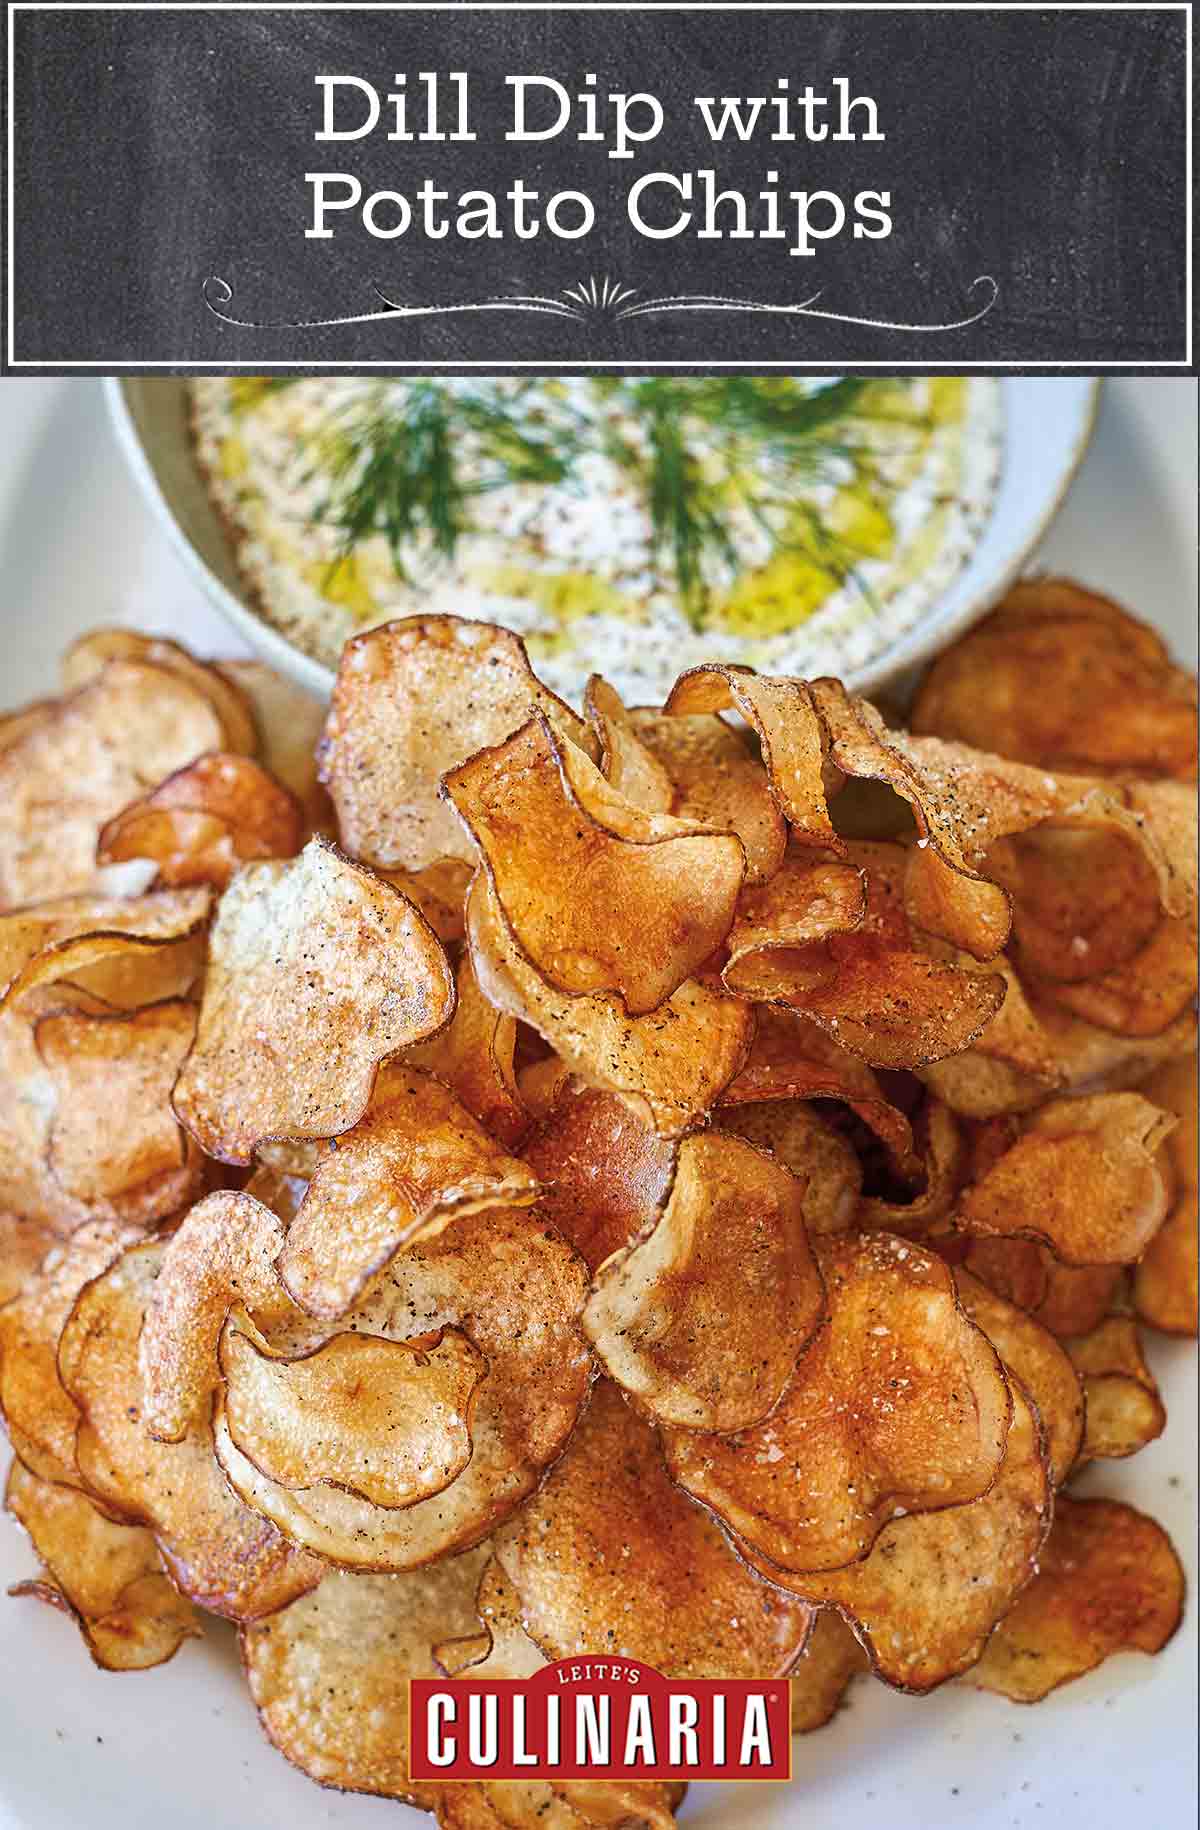 A white oval platter holding a bowl of dill dip with potato chips beside it.